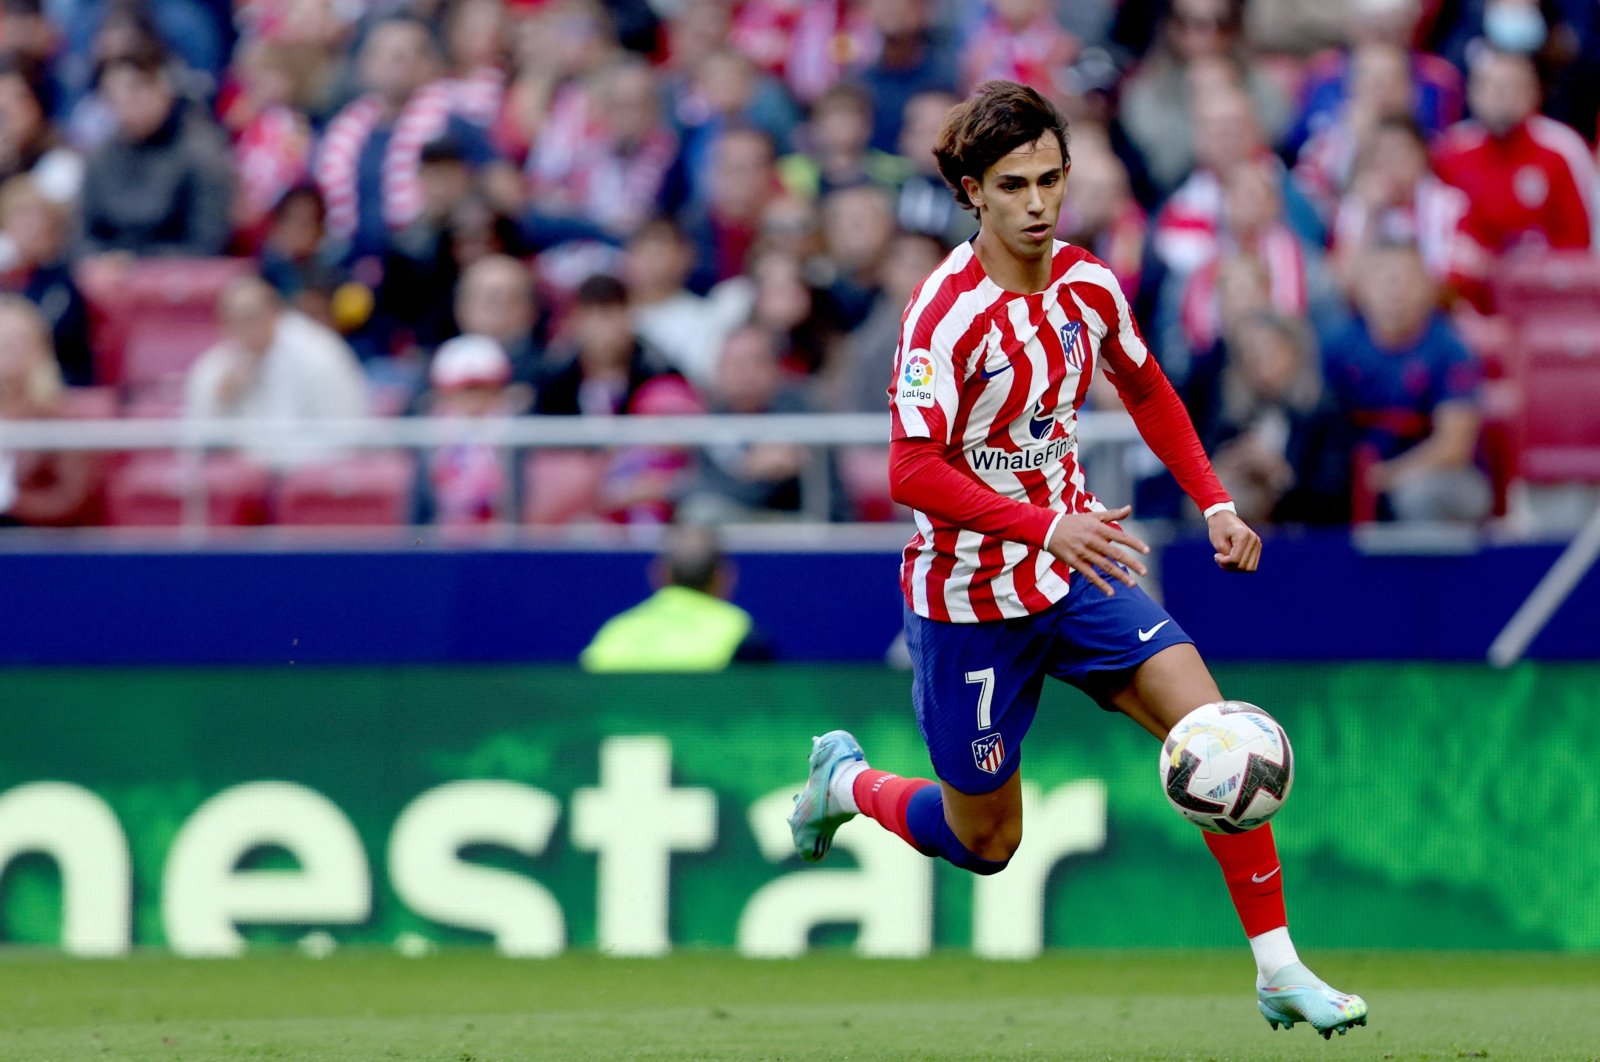 Atletico Madrid&#039;s Portuguese forward Joao Felix controls the ball before scoring his team&#039;s first goal during the Spanish league football match between Club Atletico de Madrid and RCD Espanyol at the Wanda Metropolitano stadium in Madrid, Spain, Nov. 6, 2022. (AFP Photo)